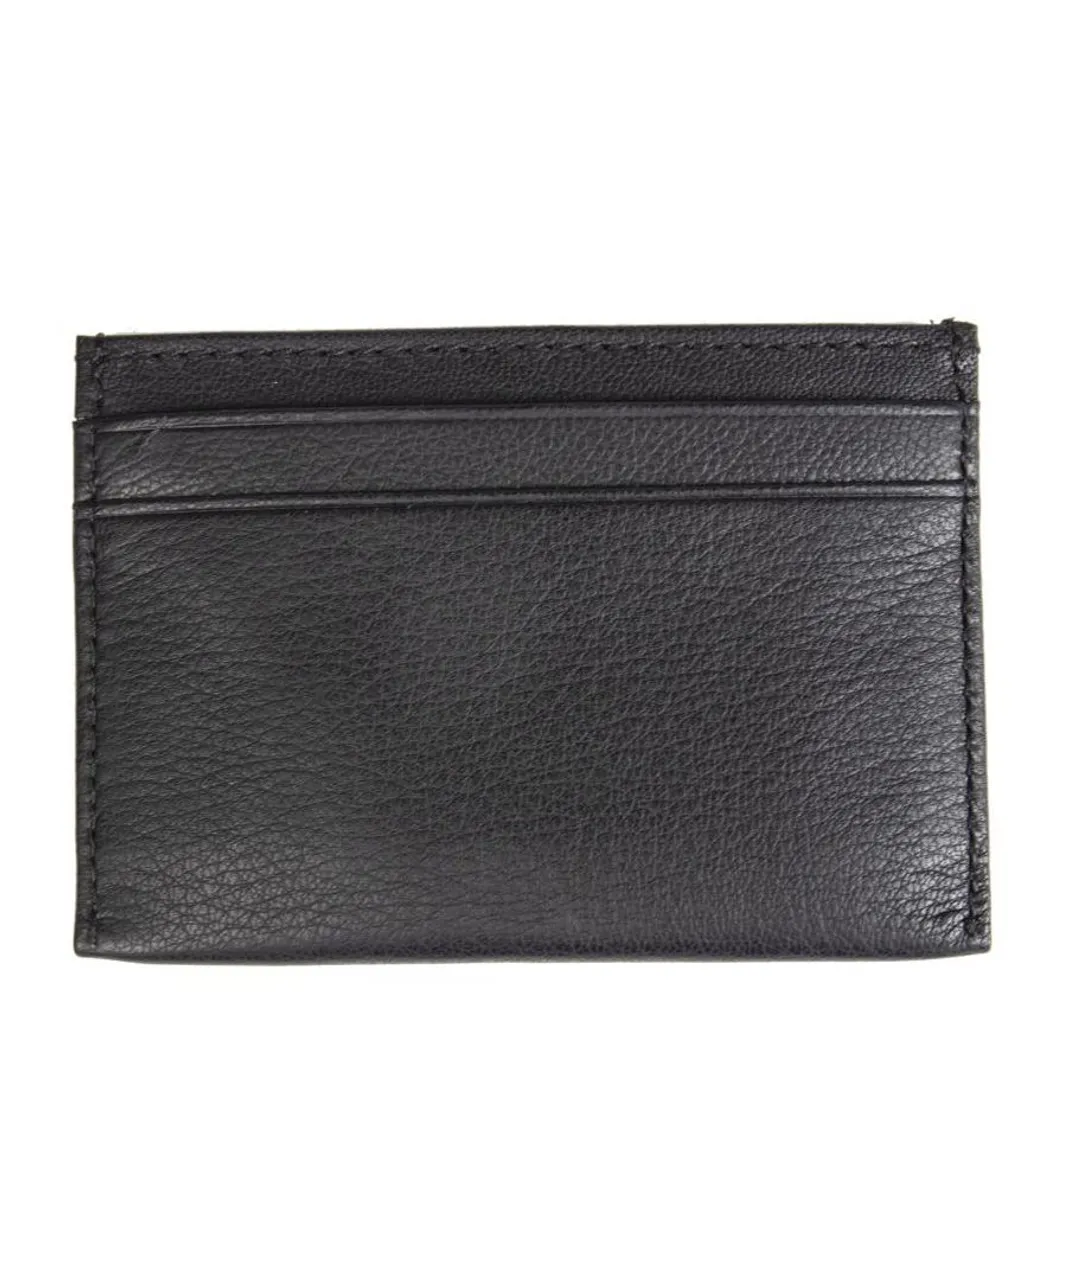 Boss Mens Big Bb Card Holder - Black Leather - One Size